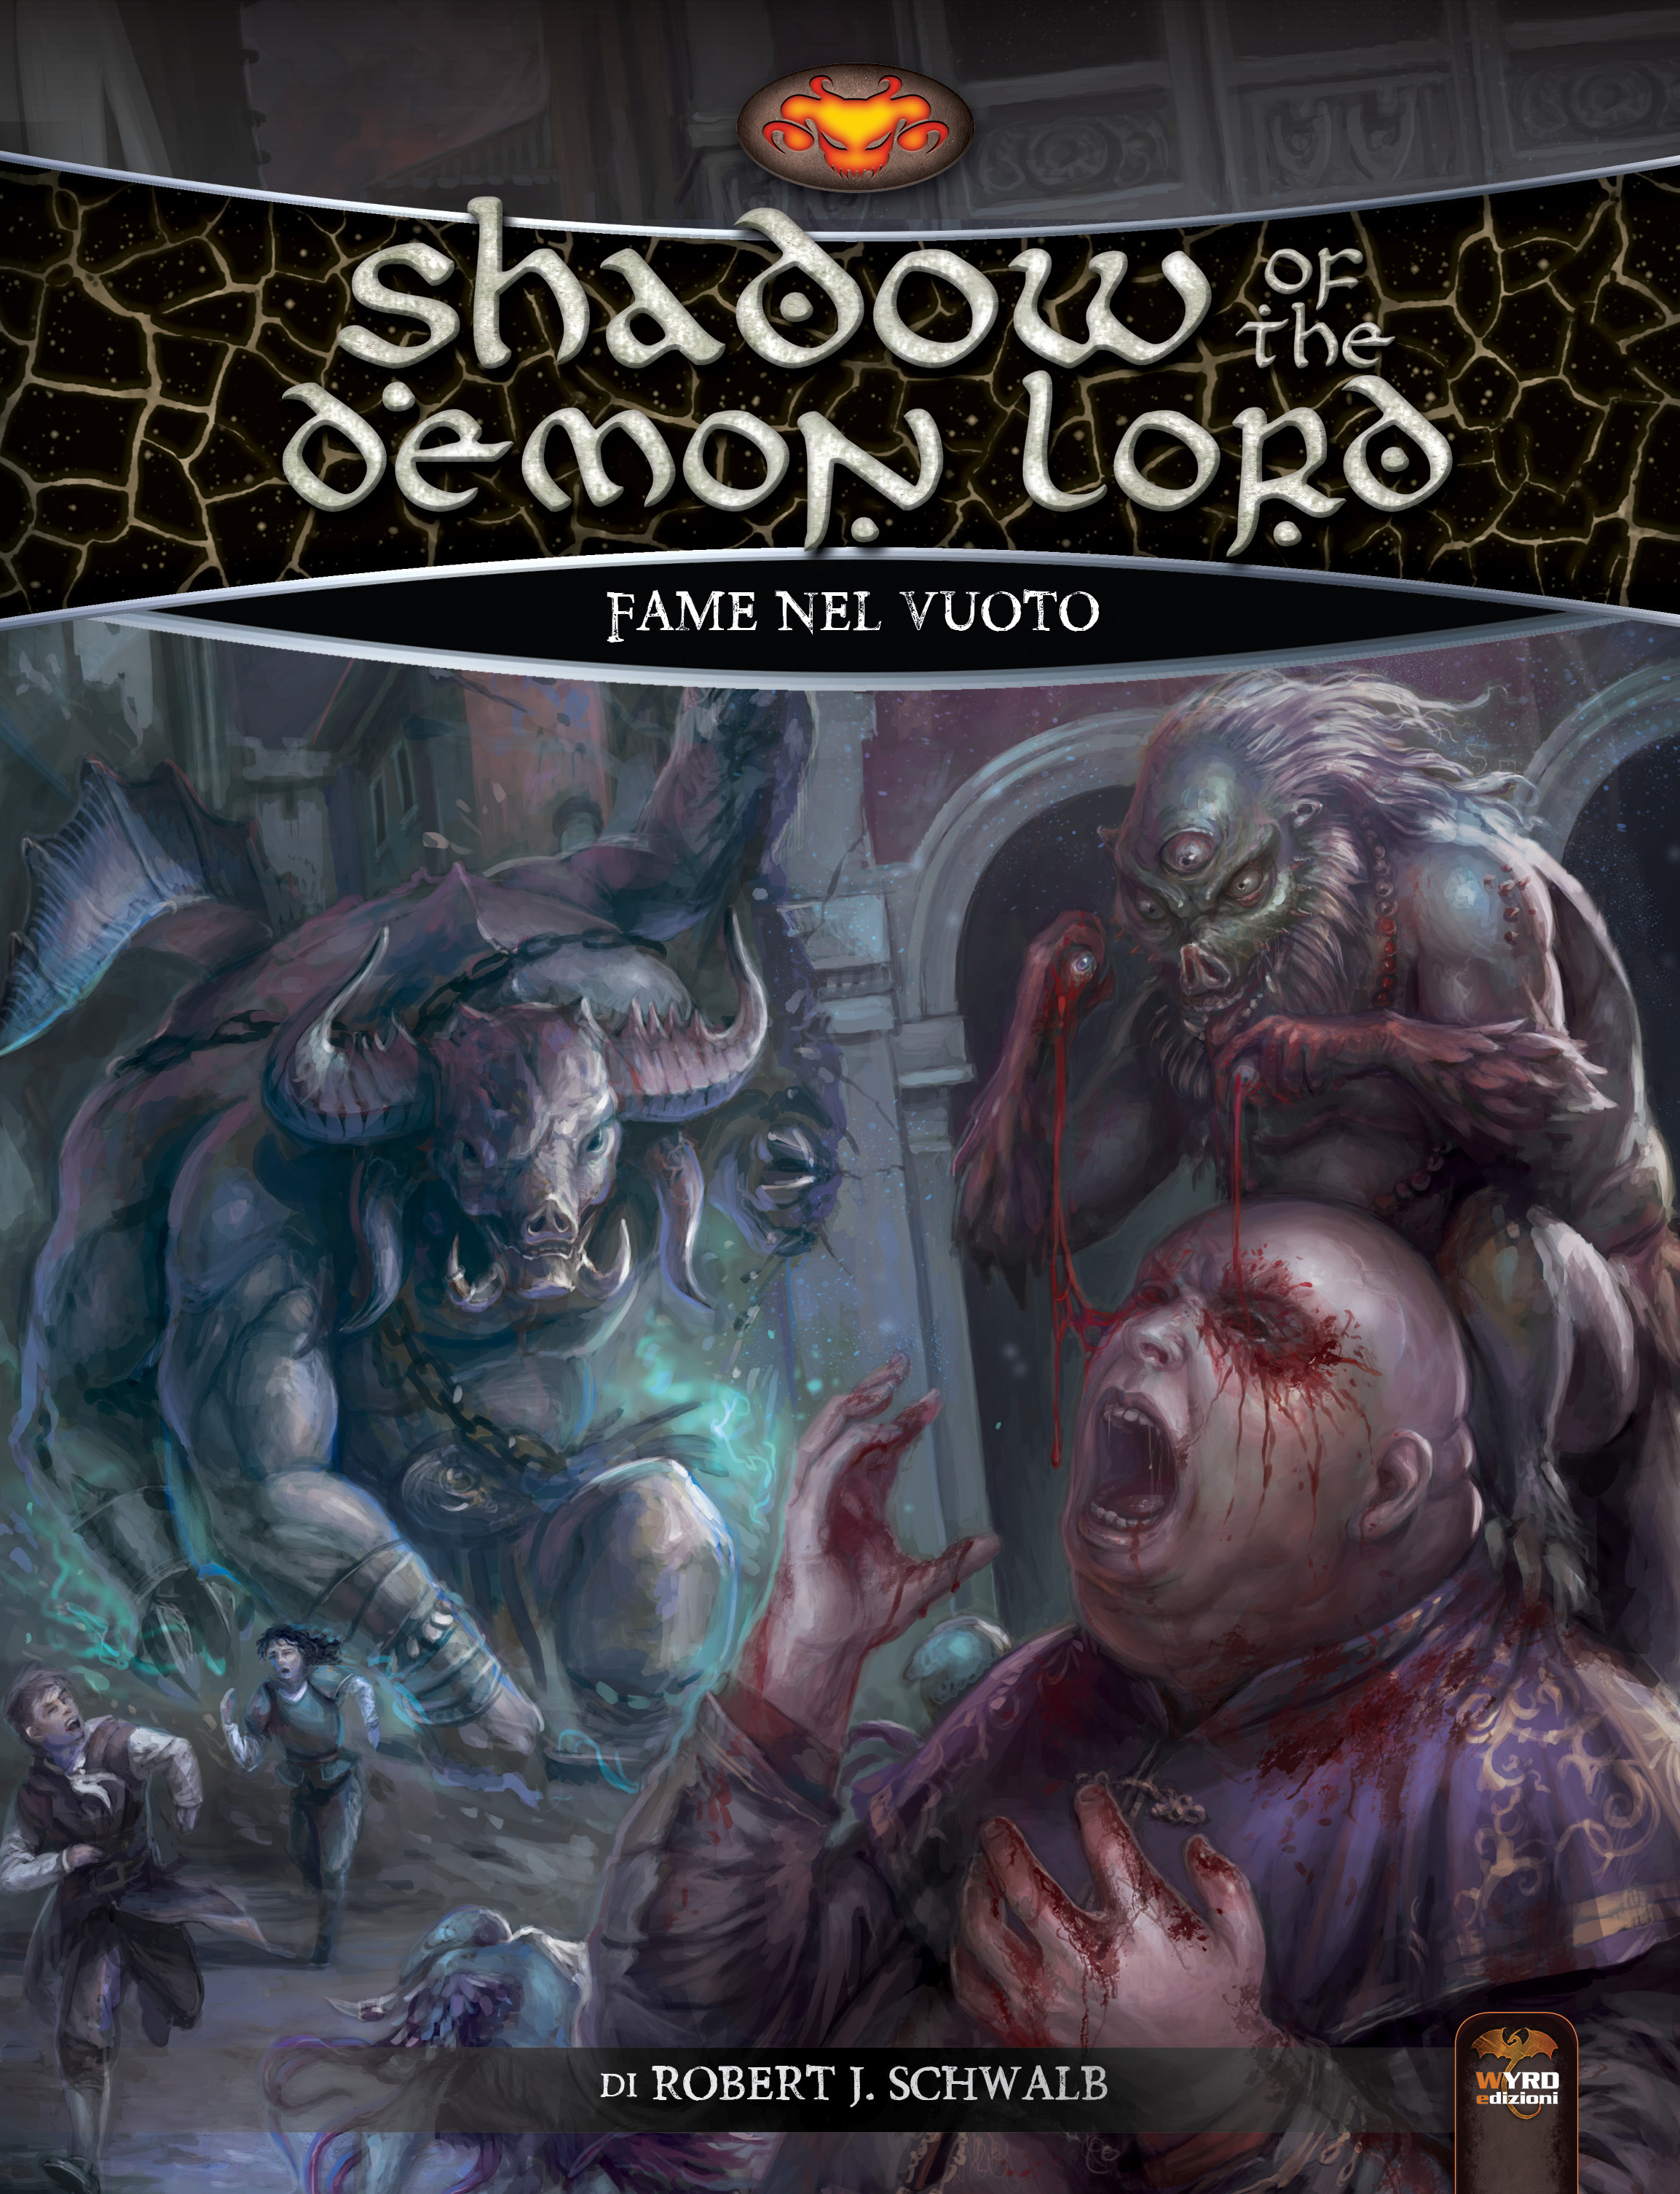 SHADOW OF THE DEMON LORD - FAME NEL VUOTO